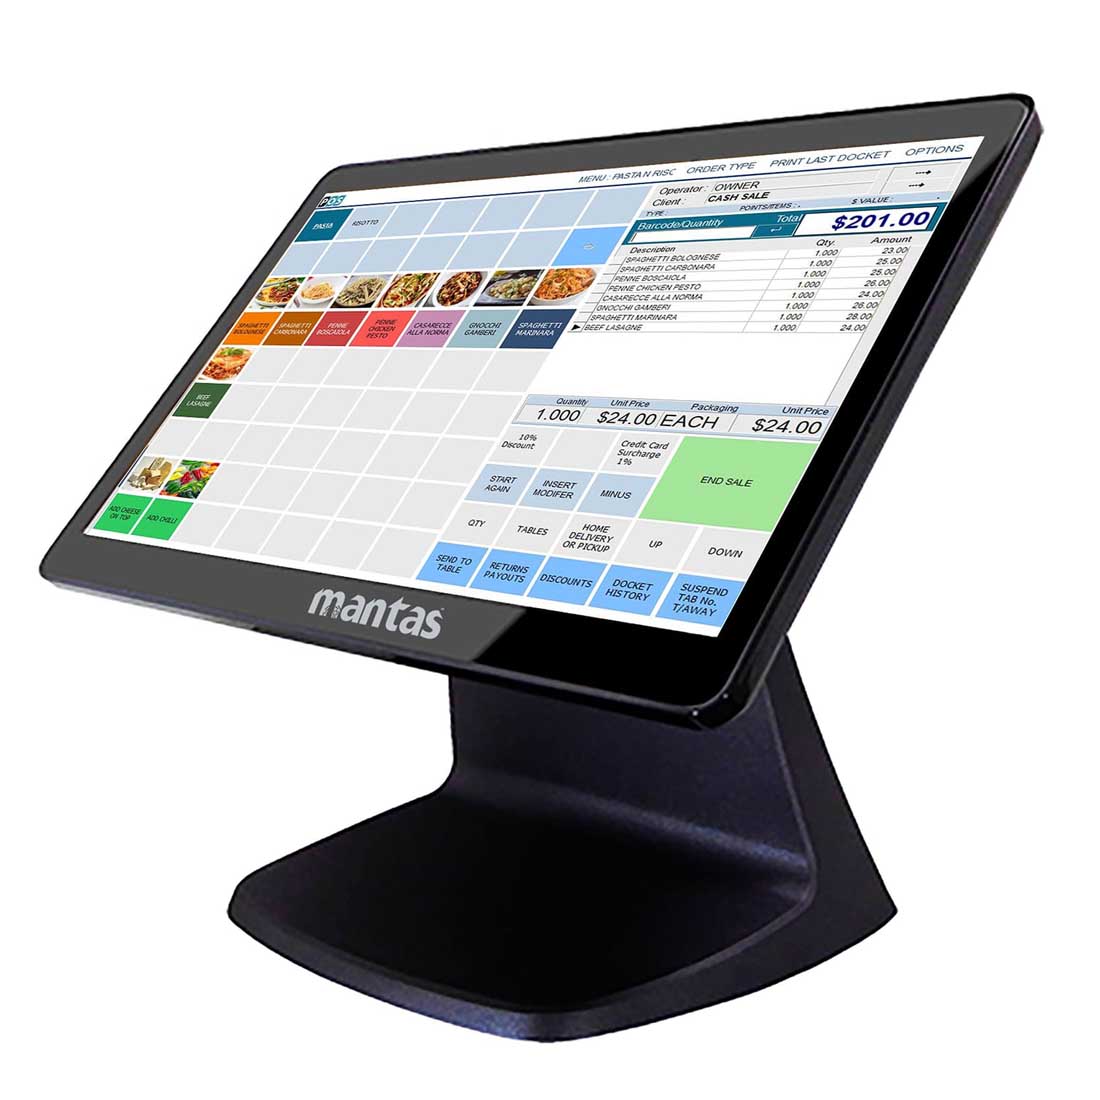 Mantas 1600 All In One Turnkey POS Solution M1600-AIO-15